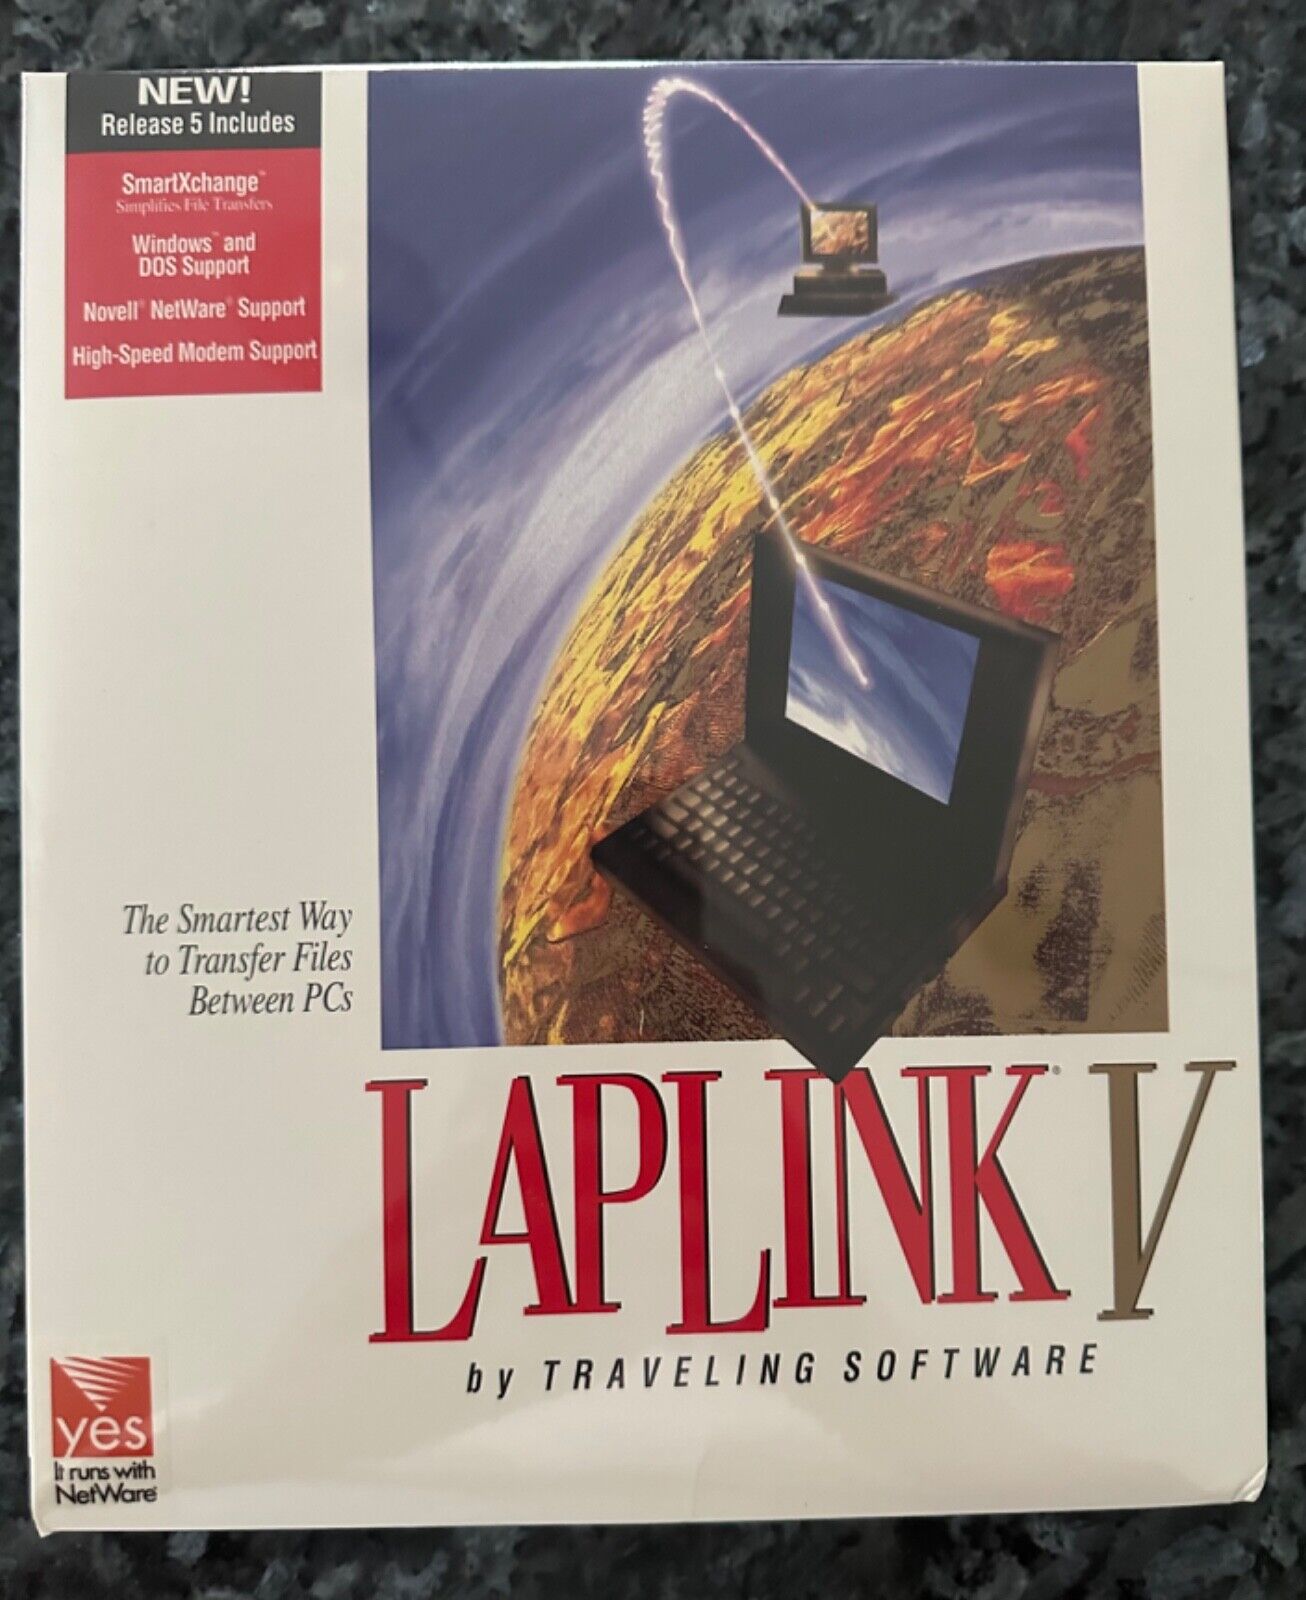 New NOS Vintage unopened Computer PC LAPLINK V by Traveling Software Made in USA